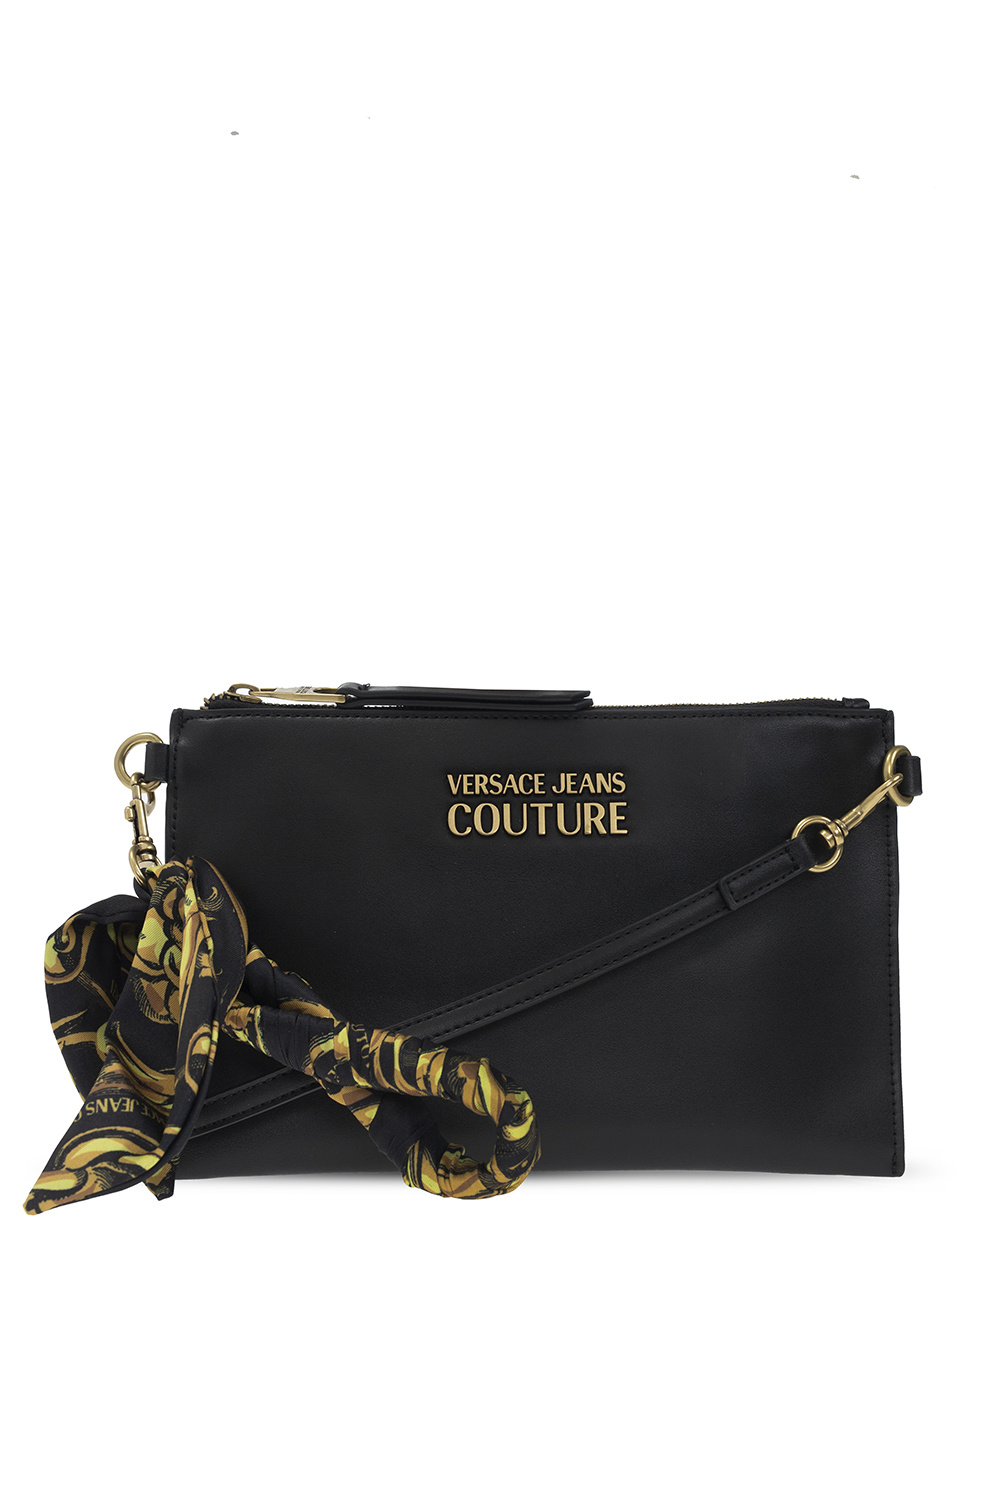 Versace Jeans Couture ‘Thelma’ shoulder bag